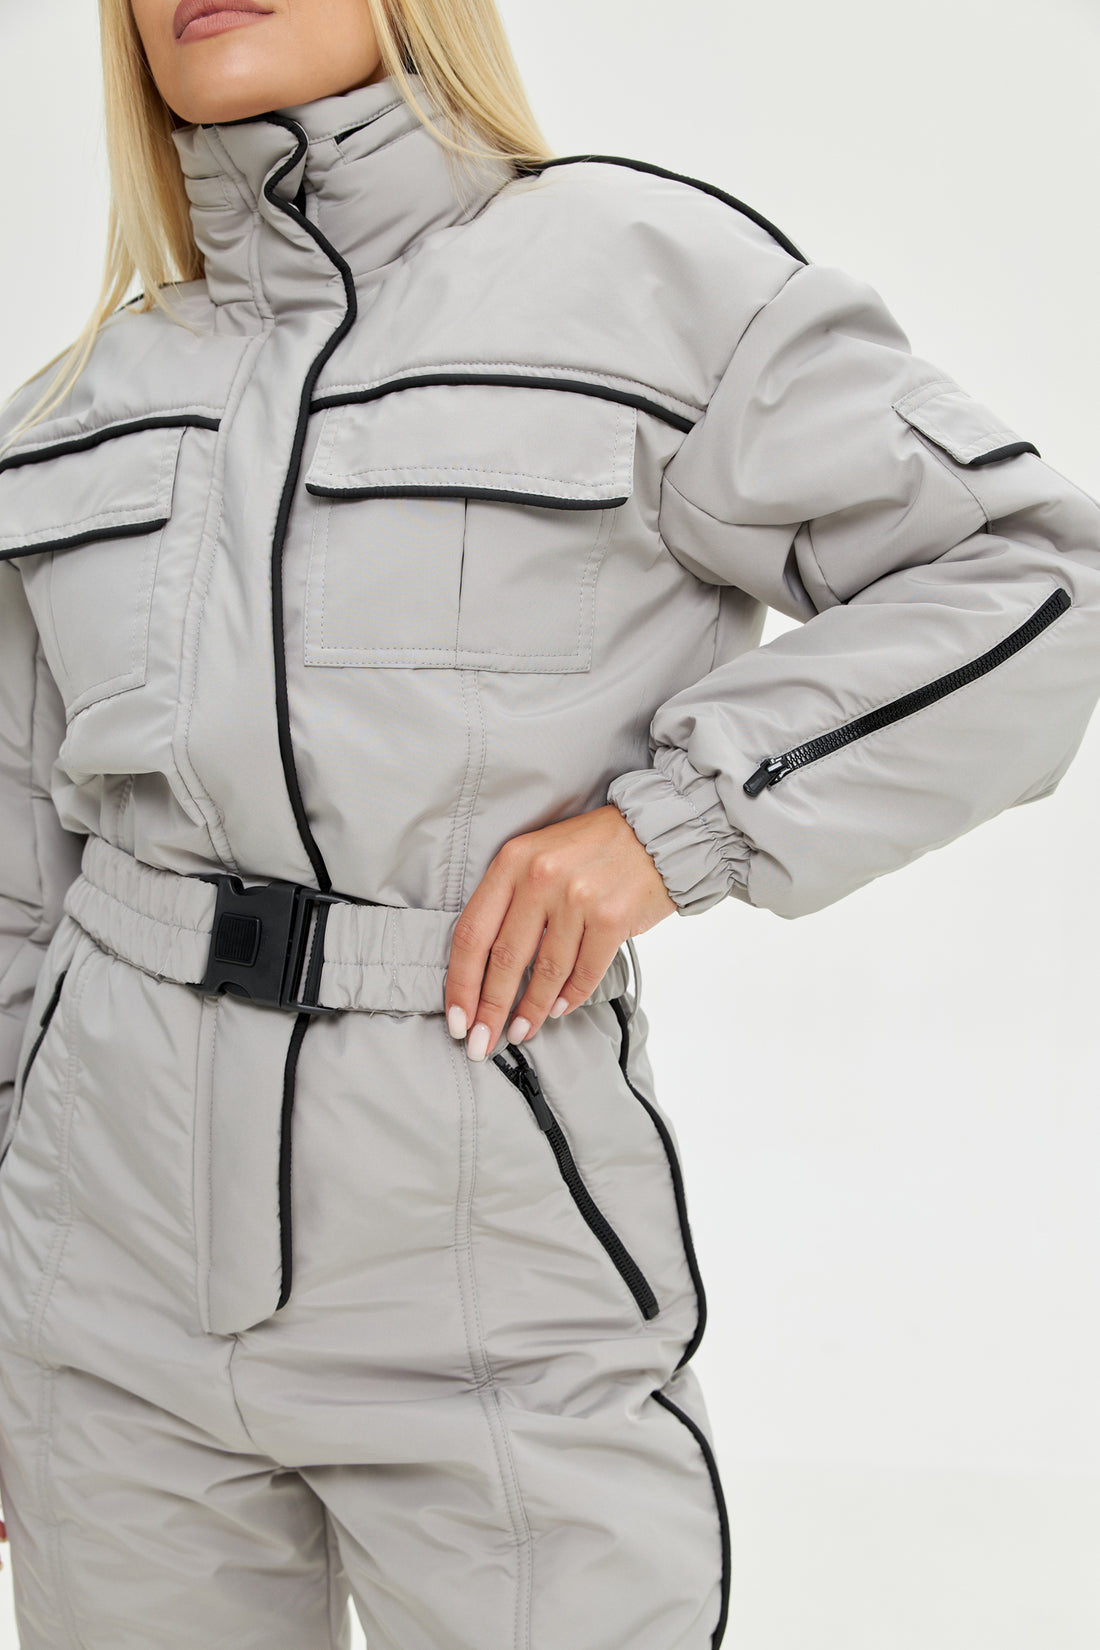 Gray ski suit BLANC - GRAY with black edging - Womens ski jacket with ski pants one piece outfit